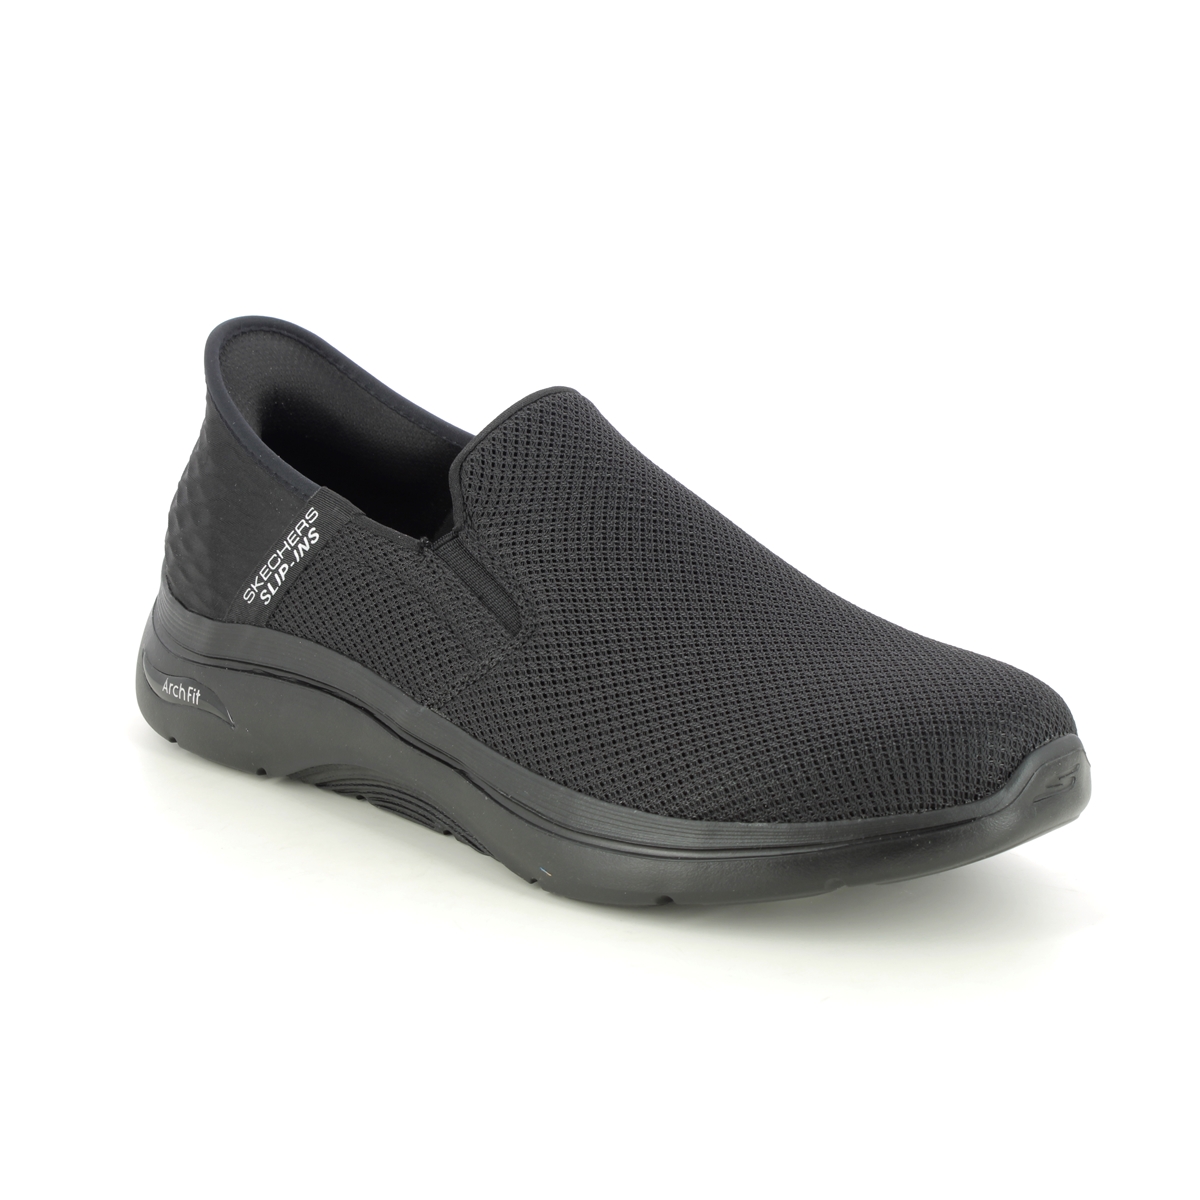 Skechers Slip Ins Arch 2 BBK Black Mens trainers 216600 in a Plain Textile in Size 7